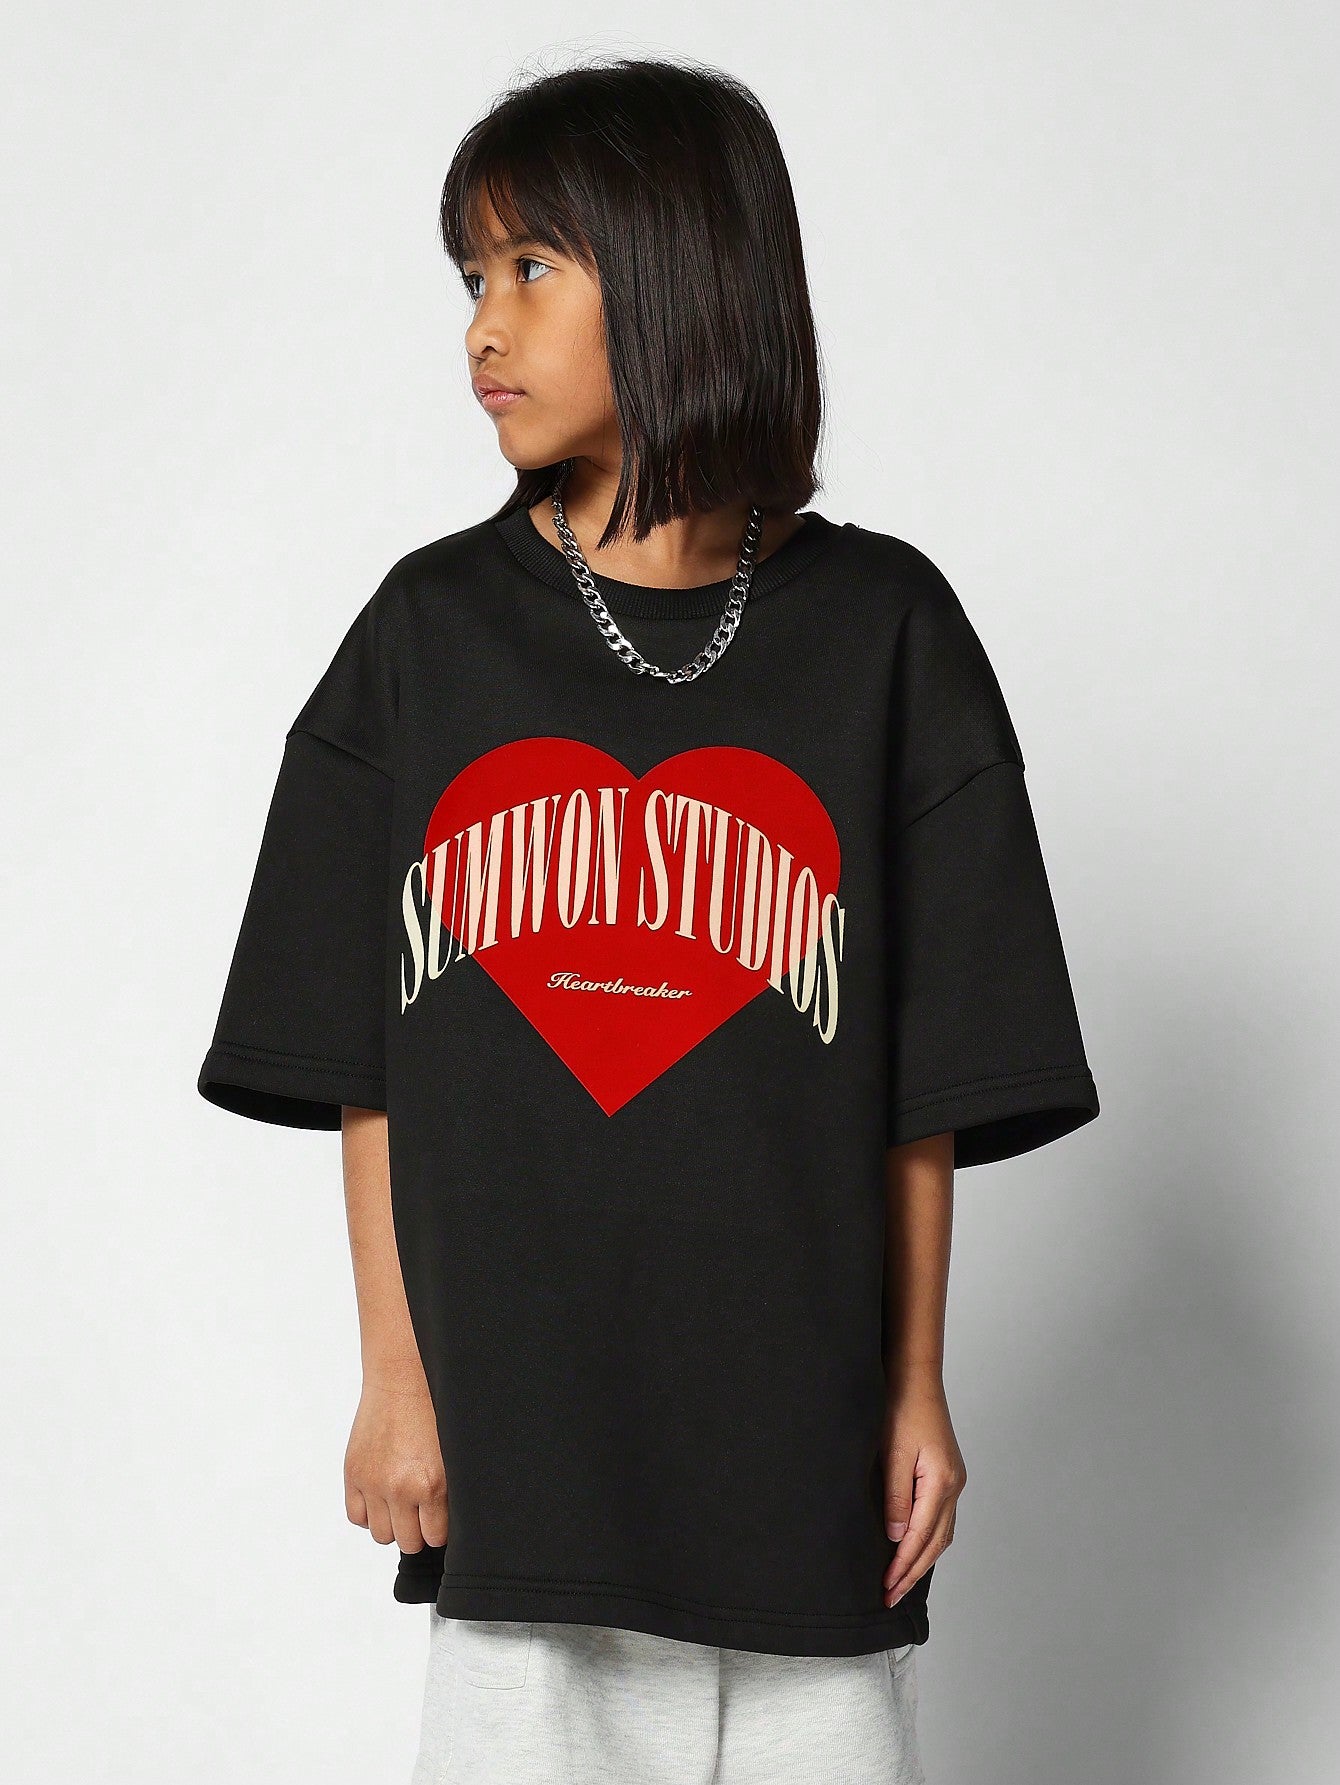 Kids Unisex Oversized Fit Tee With Front Print Back To School